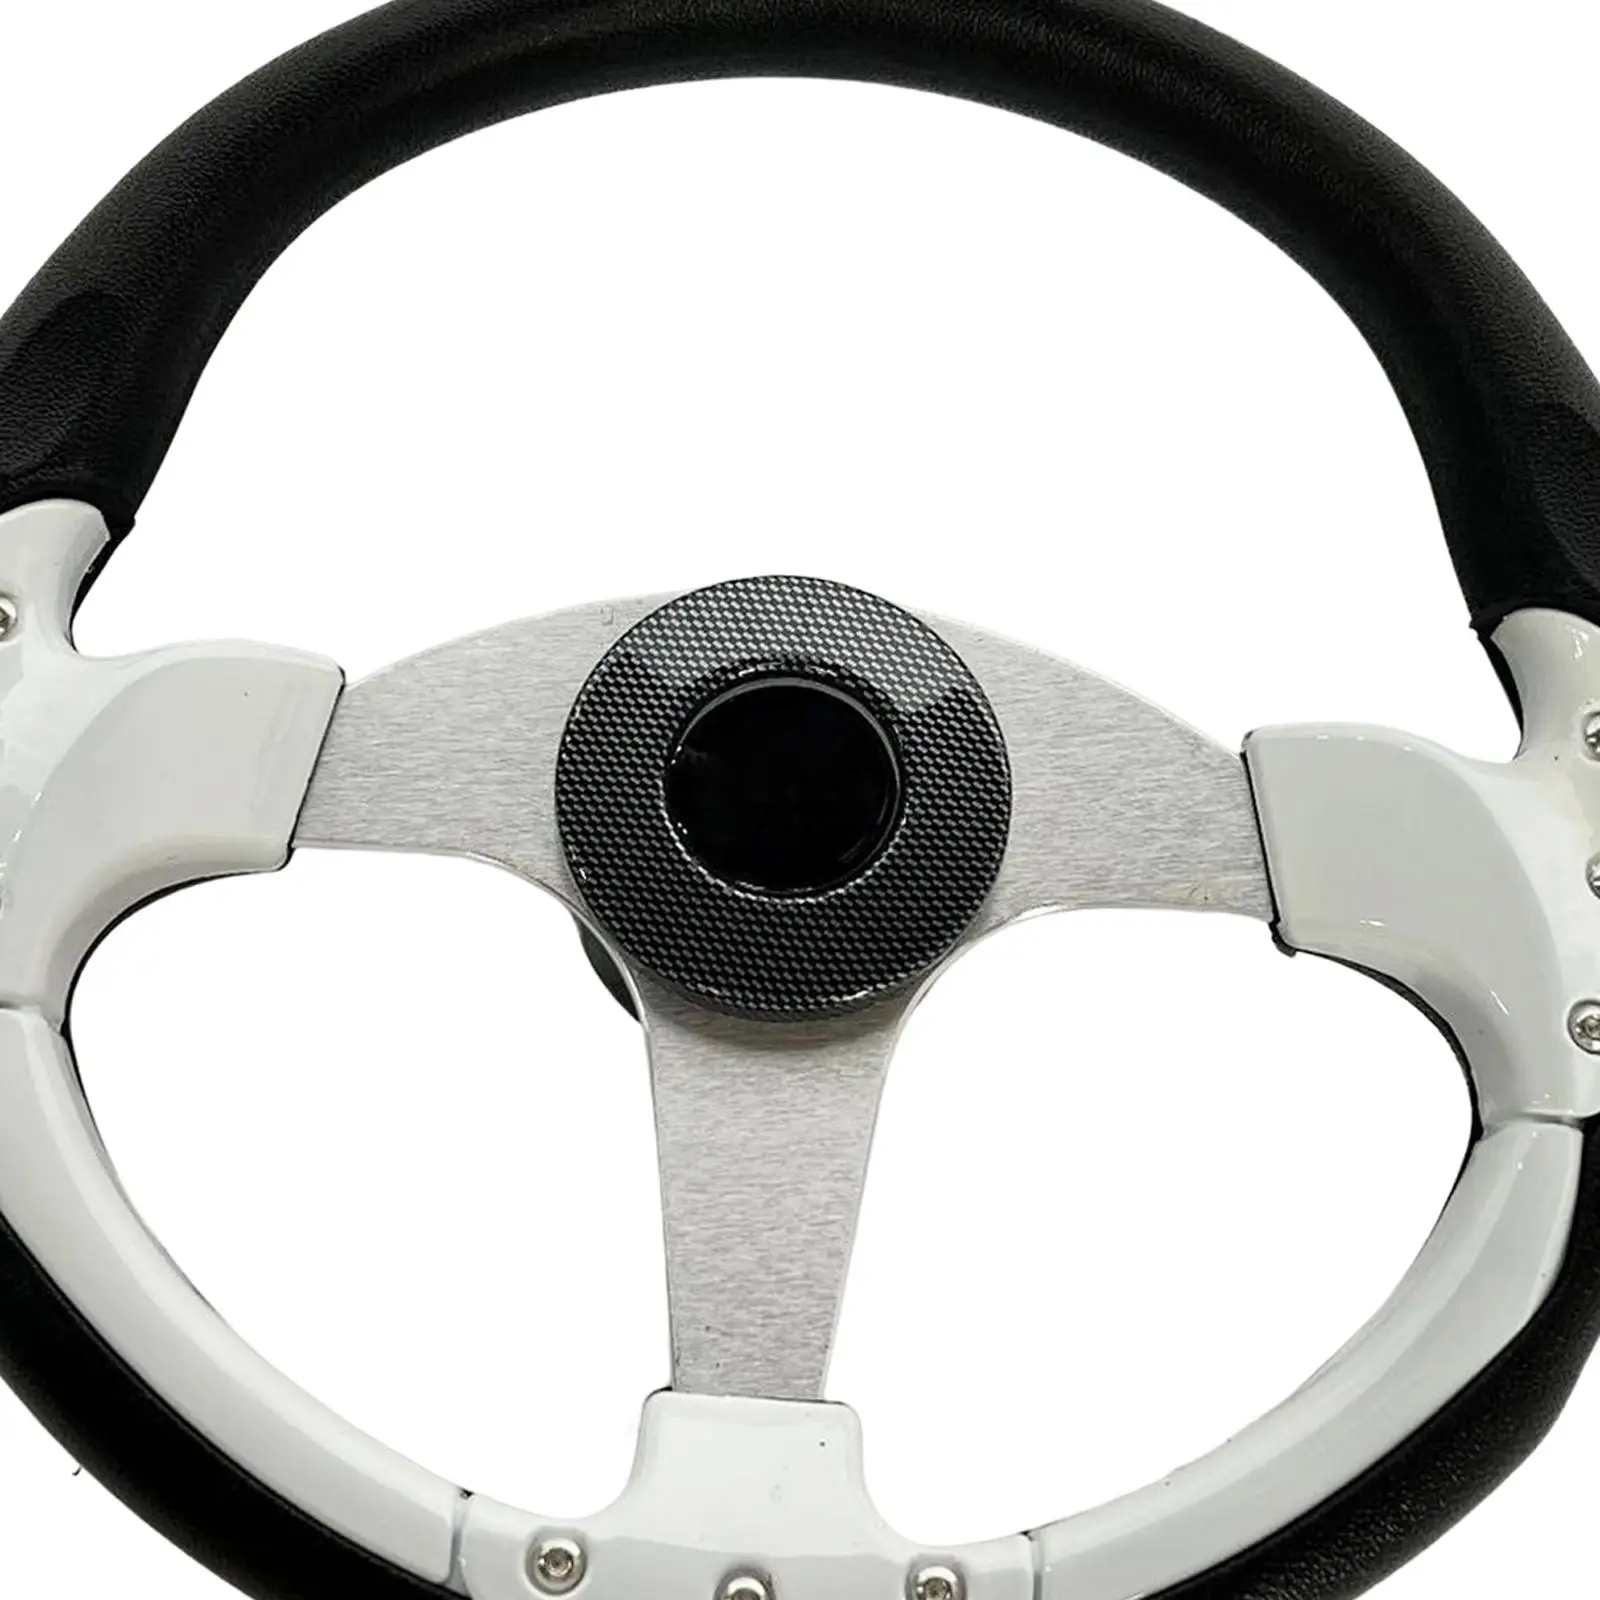 13.8 inch Boat Steering Wheel Replacement Nonslip for Pontoon Boats Vessels